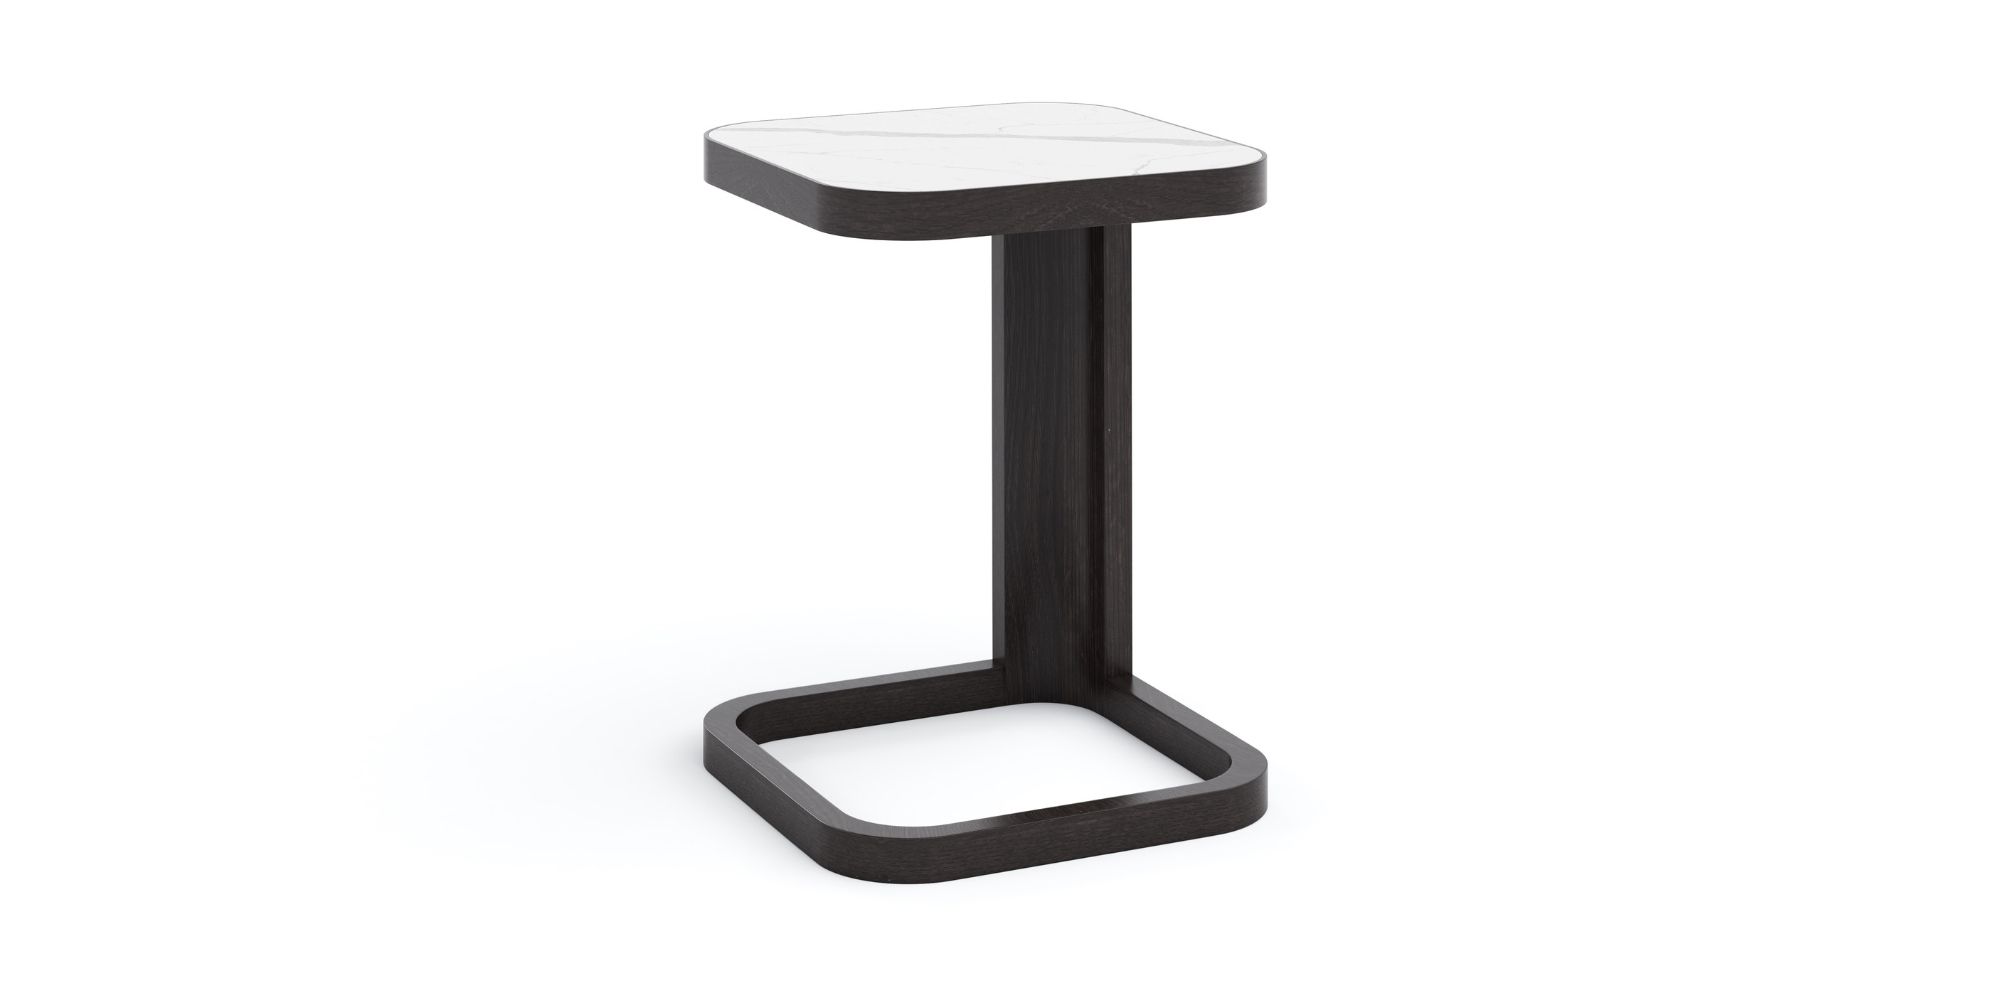 Perseus Porcelain Dining Table in Outdoor Tables Dining Tables for Asteri collection